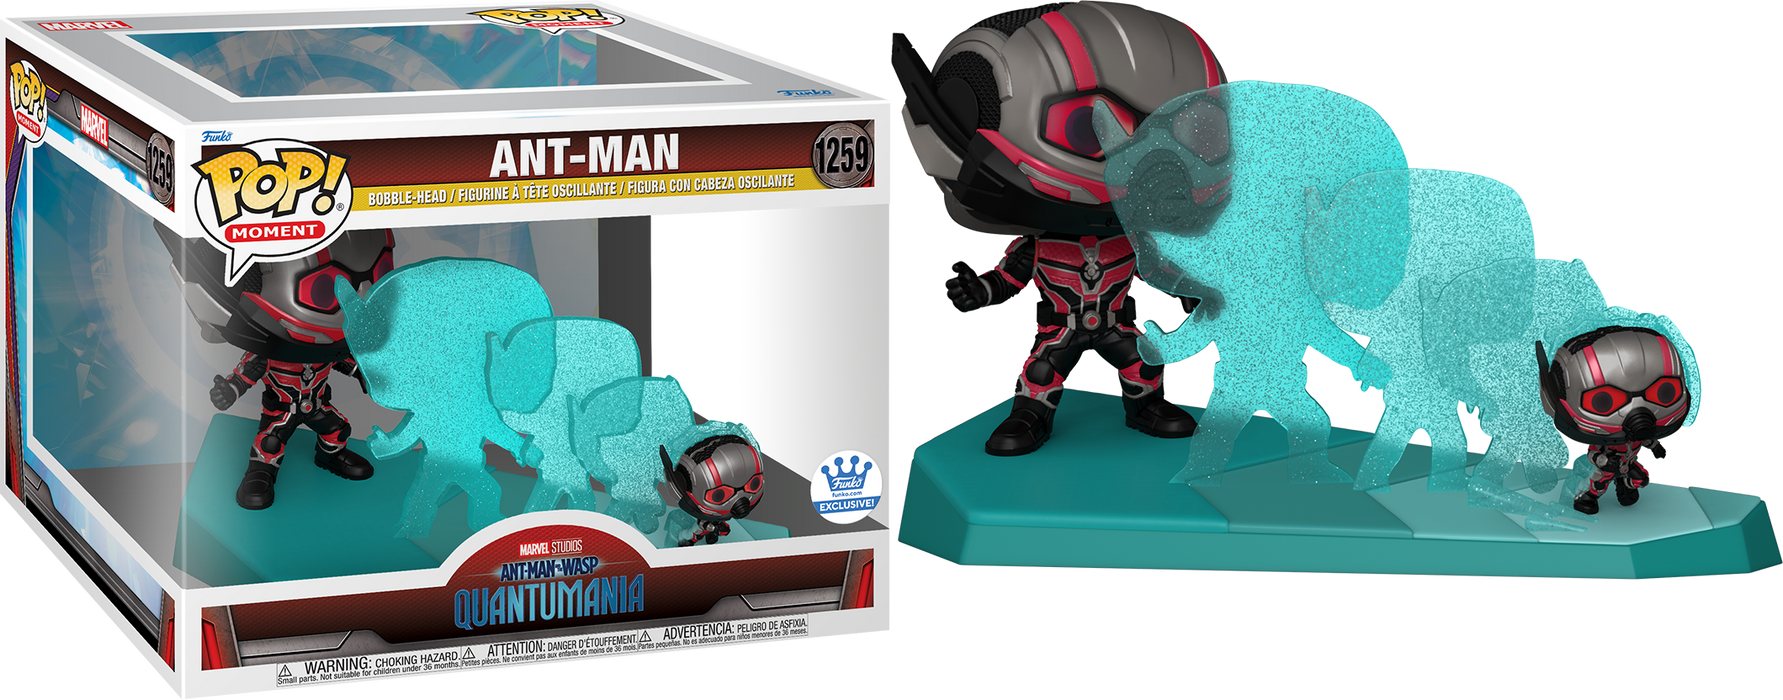 Ant-Man #1259 Funko Exclusive Funko Pop! Moment Marvel Ant-Man And The Wasp Quantumania